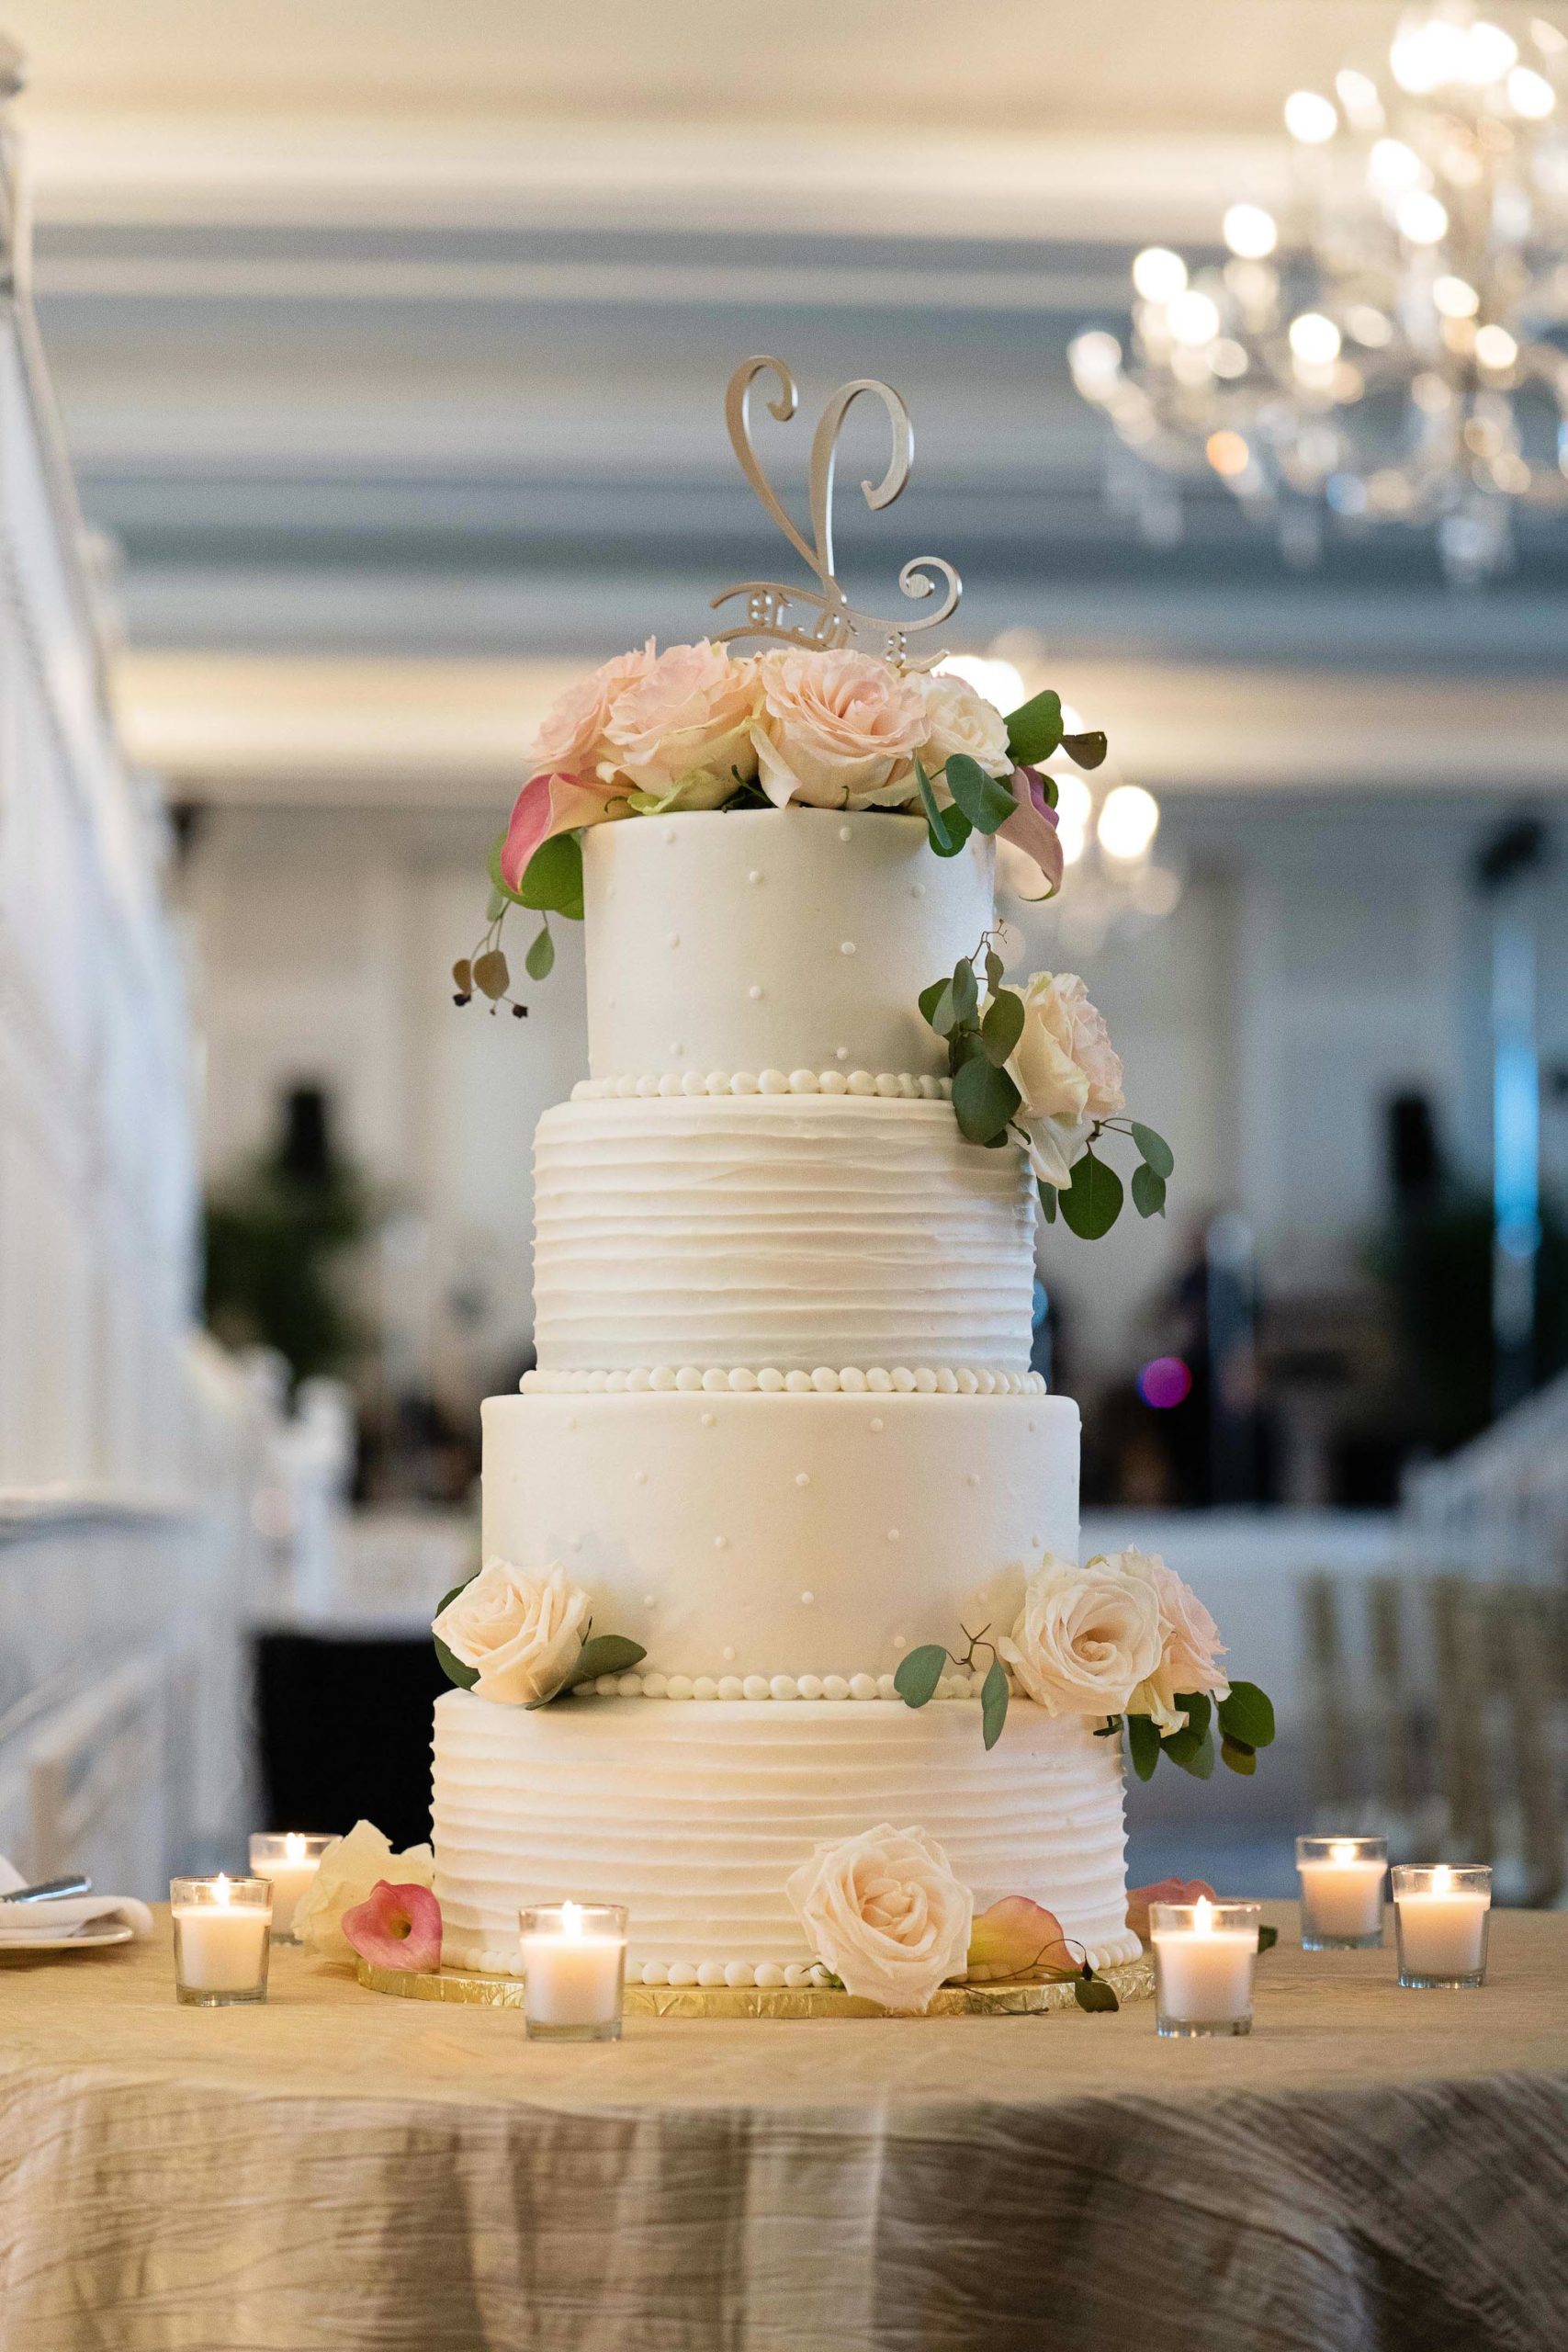 Romantic All White Four Tier Wedding Cake with Custom Monogram Silver Cake Topper and Blush Pink and Ivory Rose Floral Accents, Multi Textured Buttercream Cake by The Don CeSar Catering | Historic Tampa Bay Wedding Venue The Don CeSar in St. Pete Beach